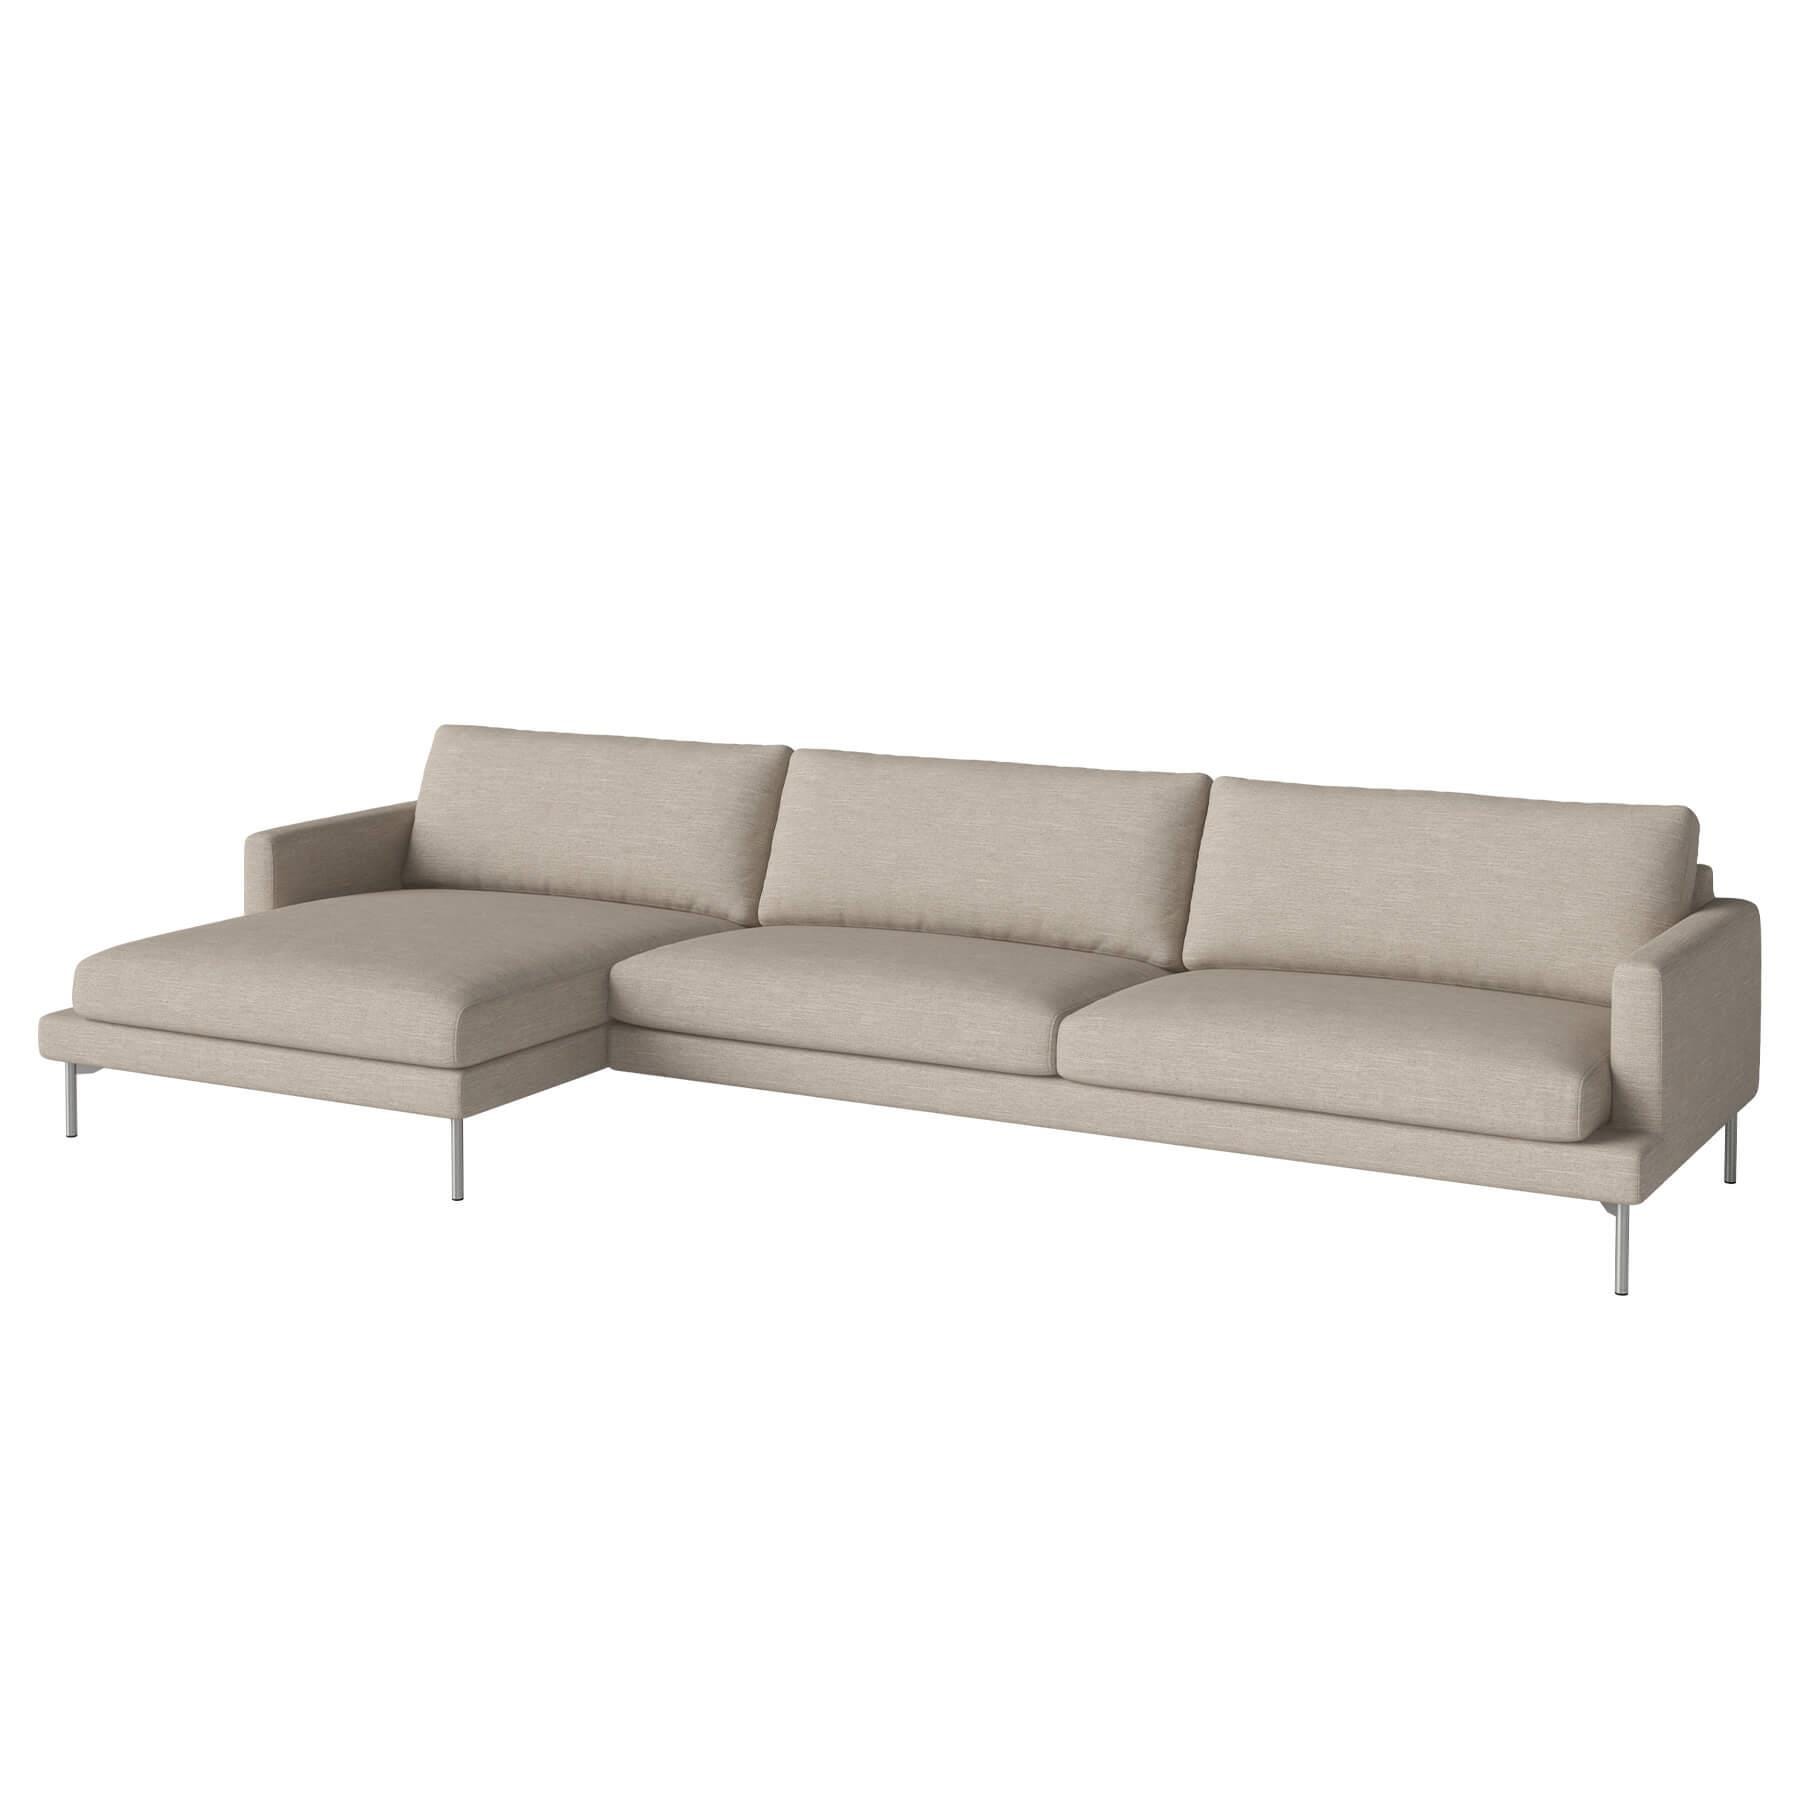 Bolia Veneda Sofa 45 Seater Sofa With Chaise Longue Brushed Steel Baize Sand Left Brown Designer Furniture From Holloways Of Ludlow